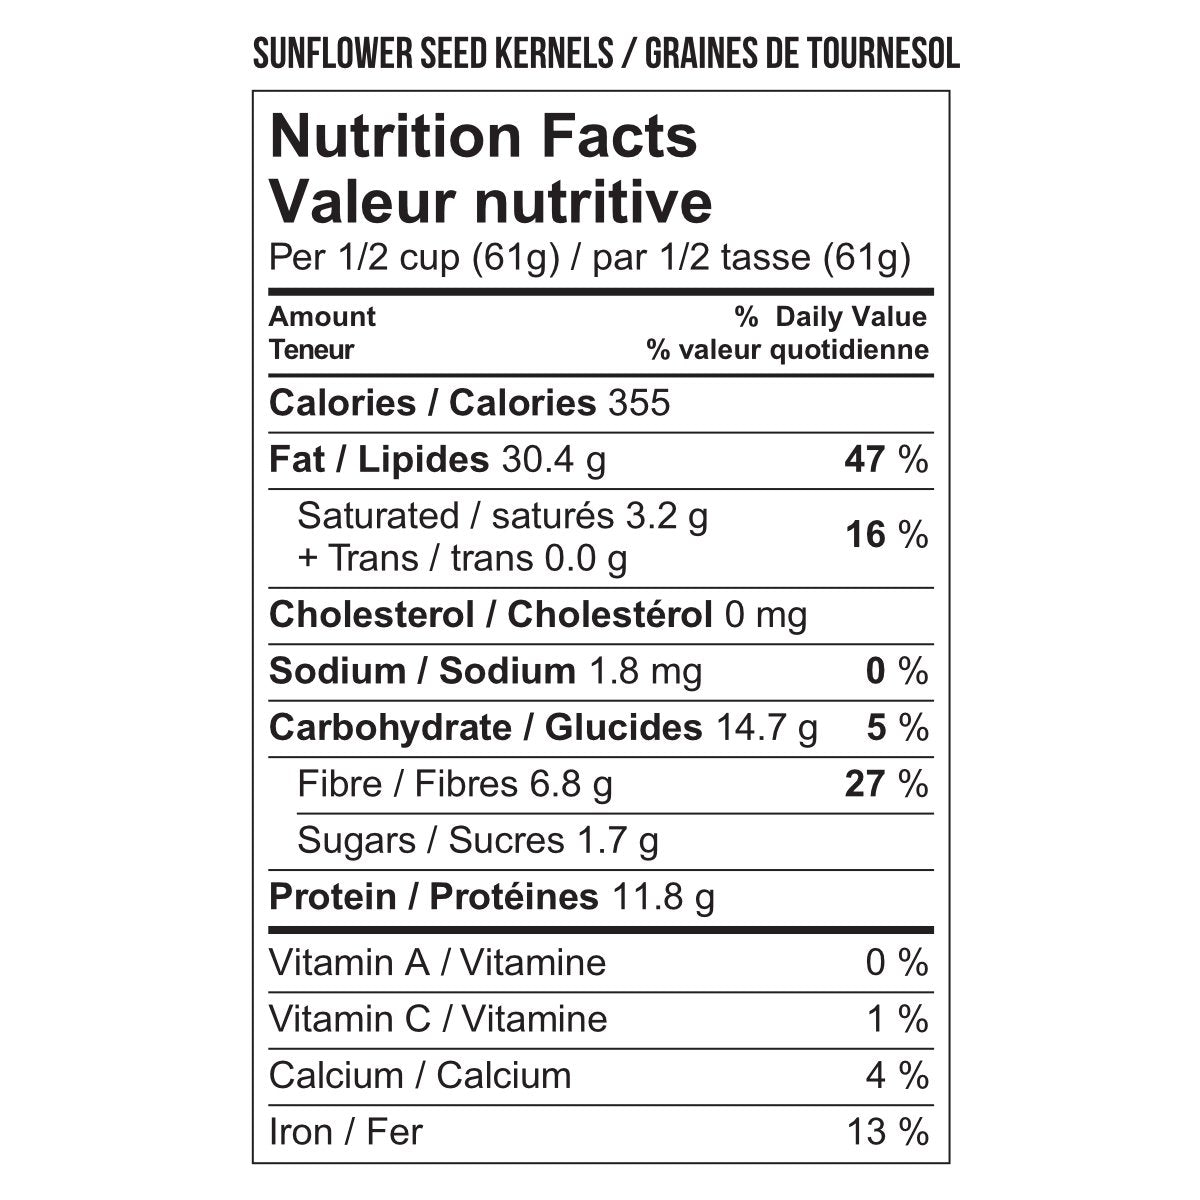 Nutritional information for Newtons No Gluten sunflower seed kernels